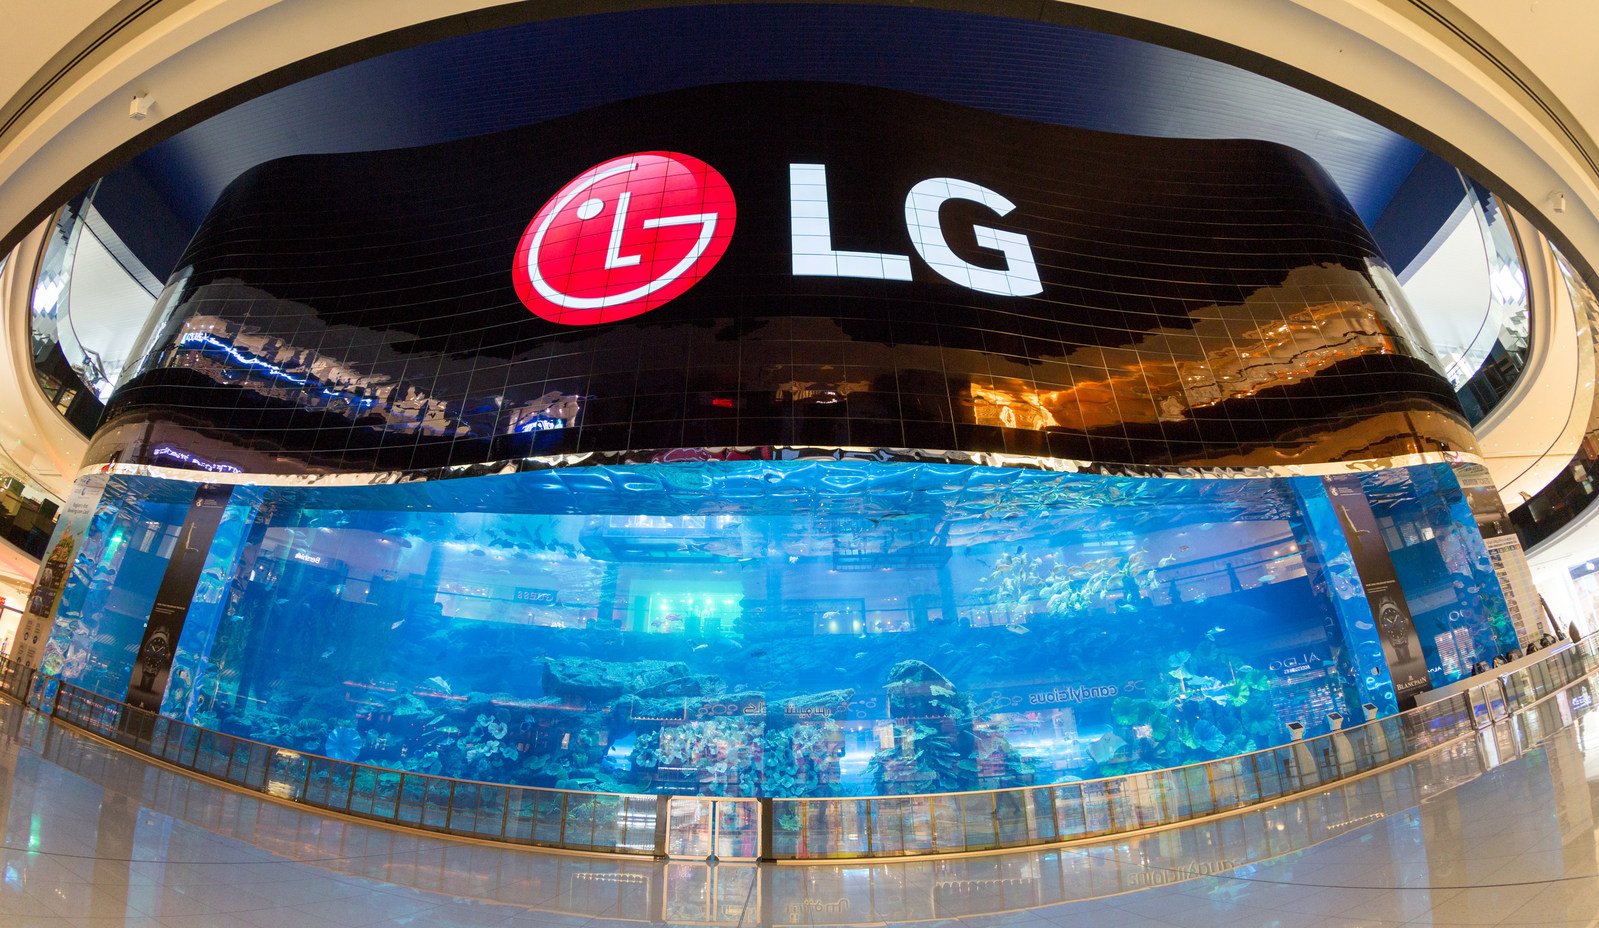 LG Electronics Business Solutions unveiled the world's largest OLED screen and world's largest high-definition video wall. Located at the Dubai Aquarium in the Dubai Mall adjacent to the Burj Khalifa, the mega-sized video wall was created using 820 Open Frame LG OLED digital signage panels. Source: LG Electronics